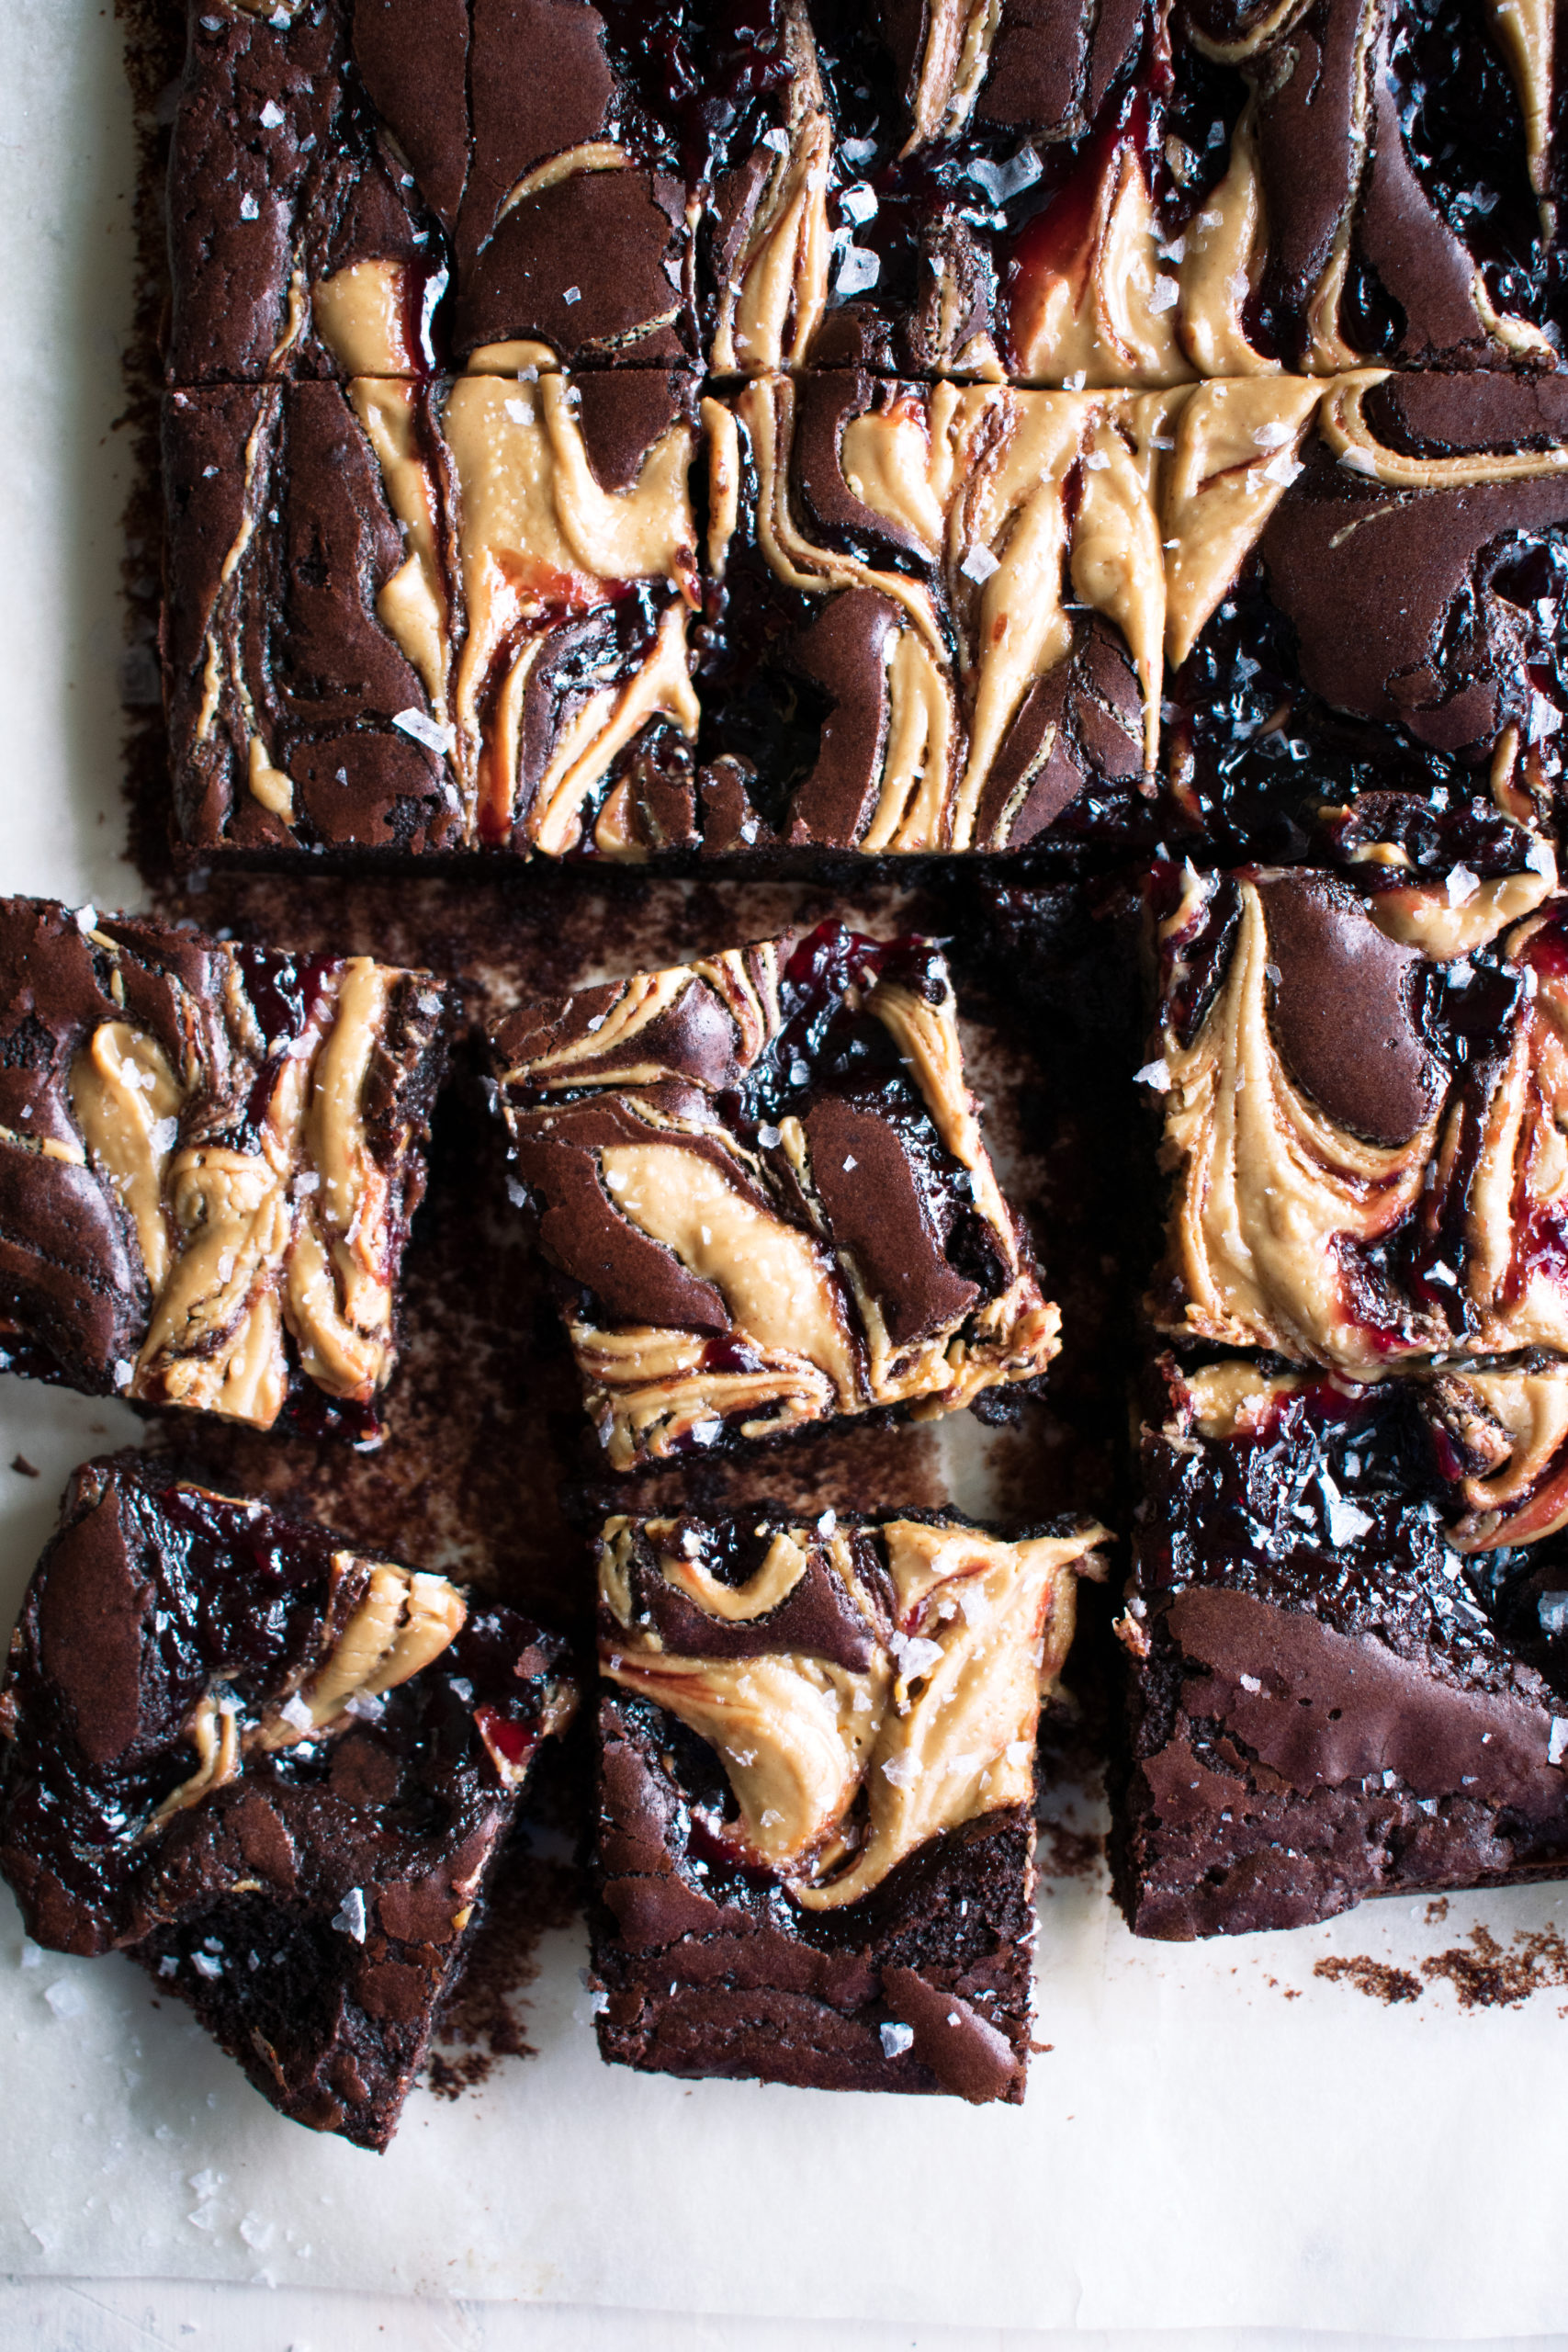 Peanut Butter and Jelly Brownies - The Original Dish